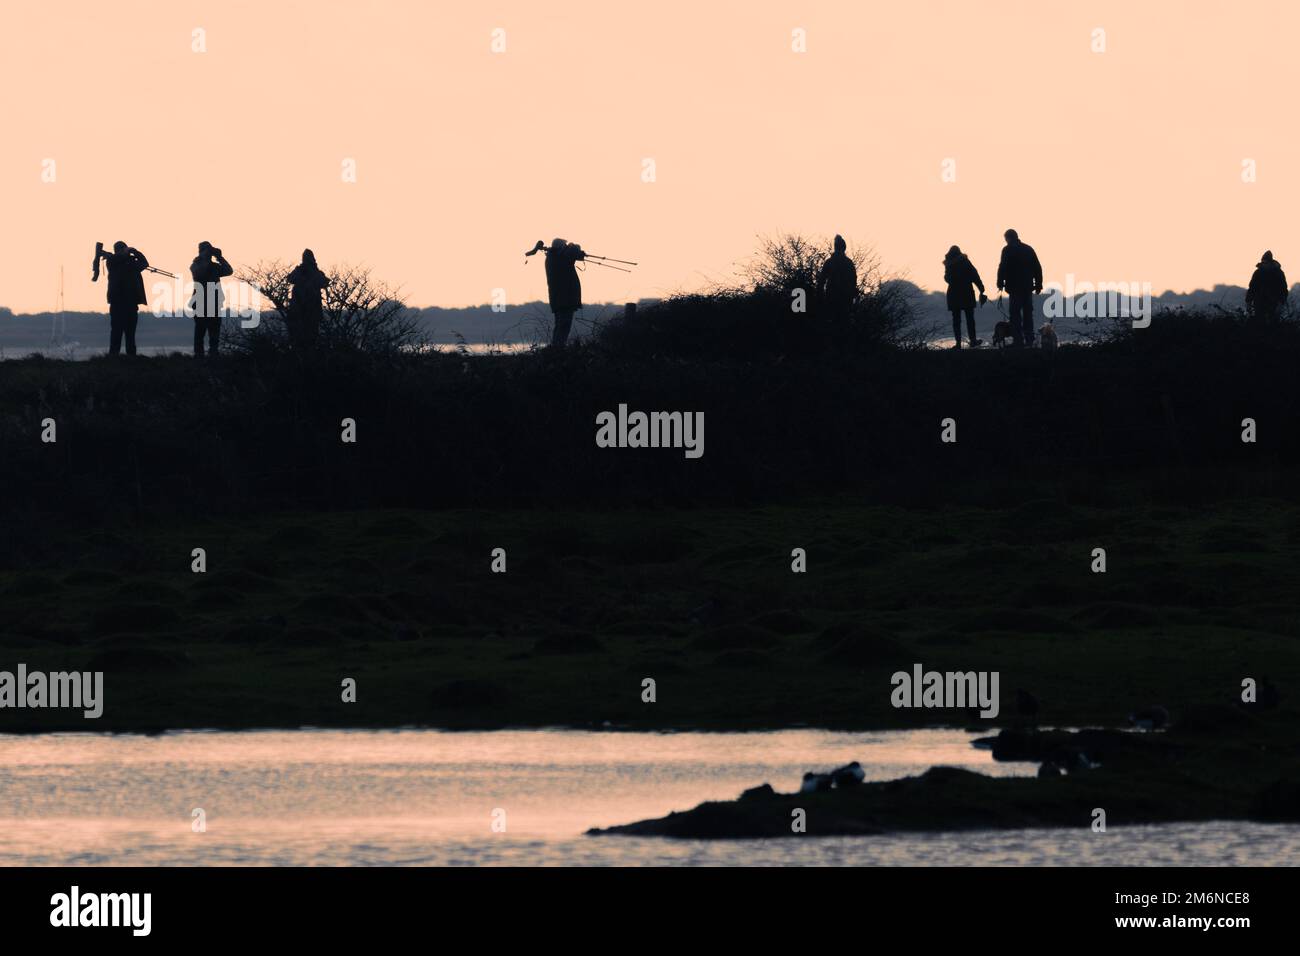 Group of birdwatchers silhouetted against the sky at Farlington Marshes Nature Reserve, Hampshire, England, UK. Healthy outdoor activity or hobby. Stock Photo